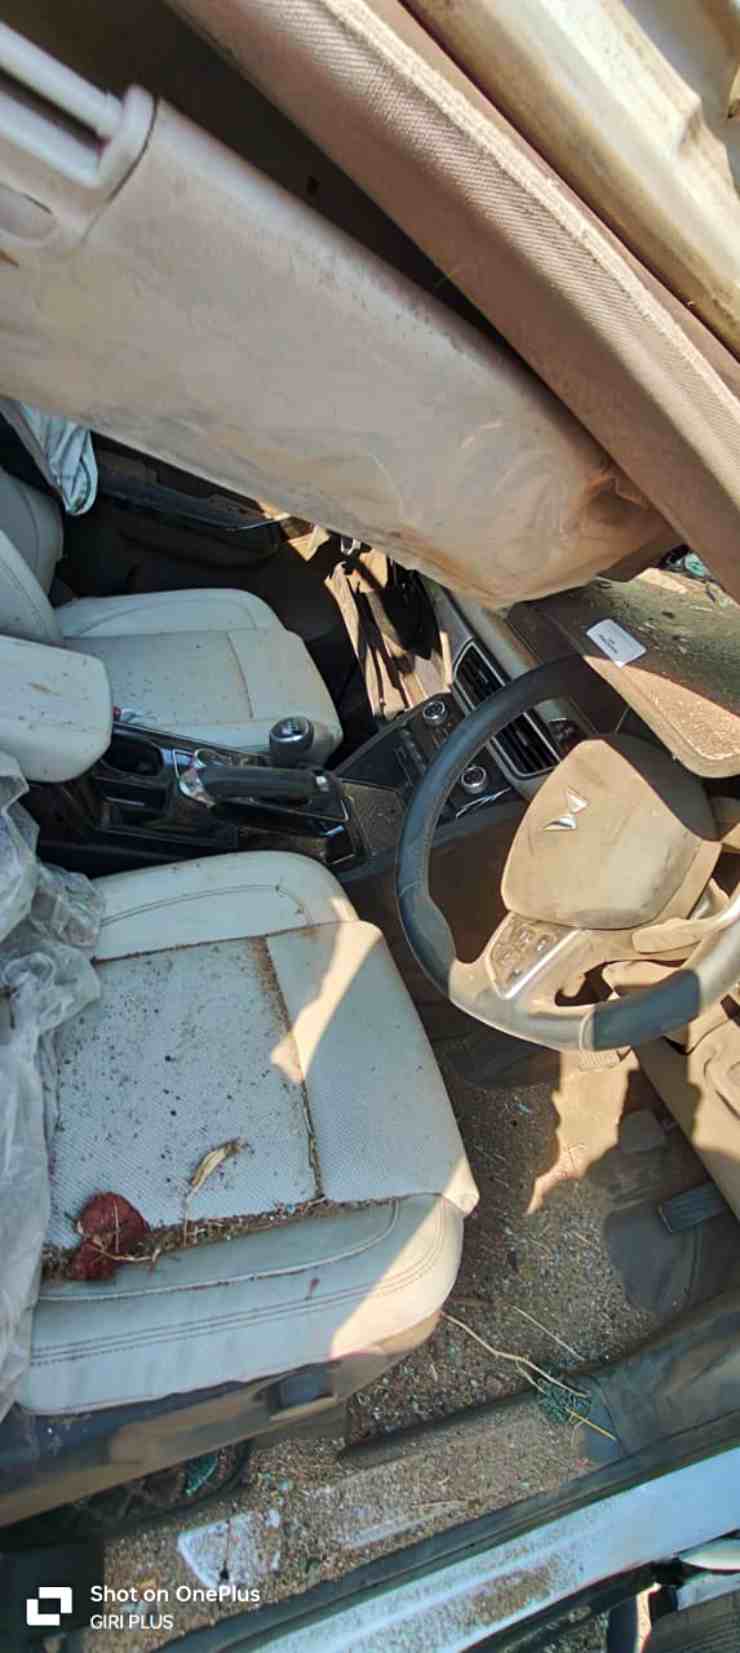 Mahindra XUV700 rolled over front airbags did not open